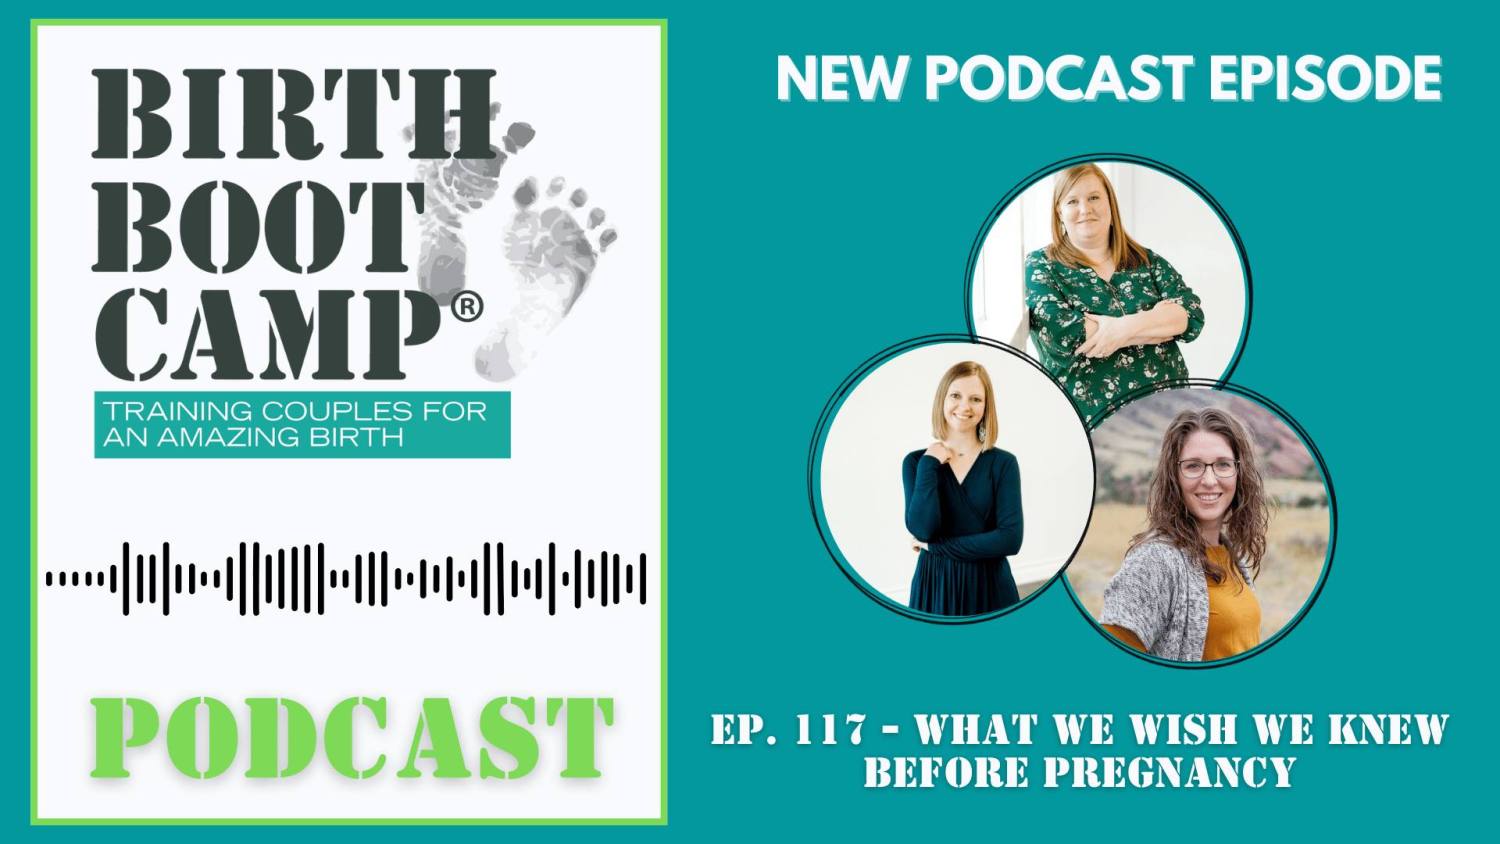 Text: Birth Boot Camp Podcast, New Podcast Episode 117 - What we wish we knew before pregnancy. Image: Headshots of Hollie Hauptly, CEO, Cheryl Amelang Certification Coordinator, and Liana Wolfe administrator.